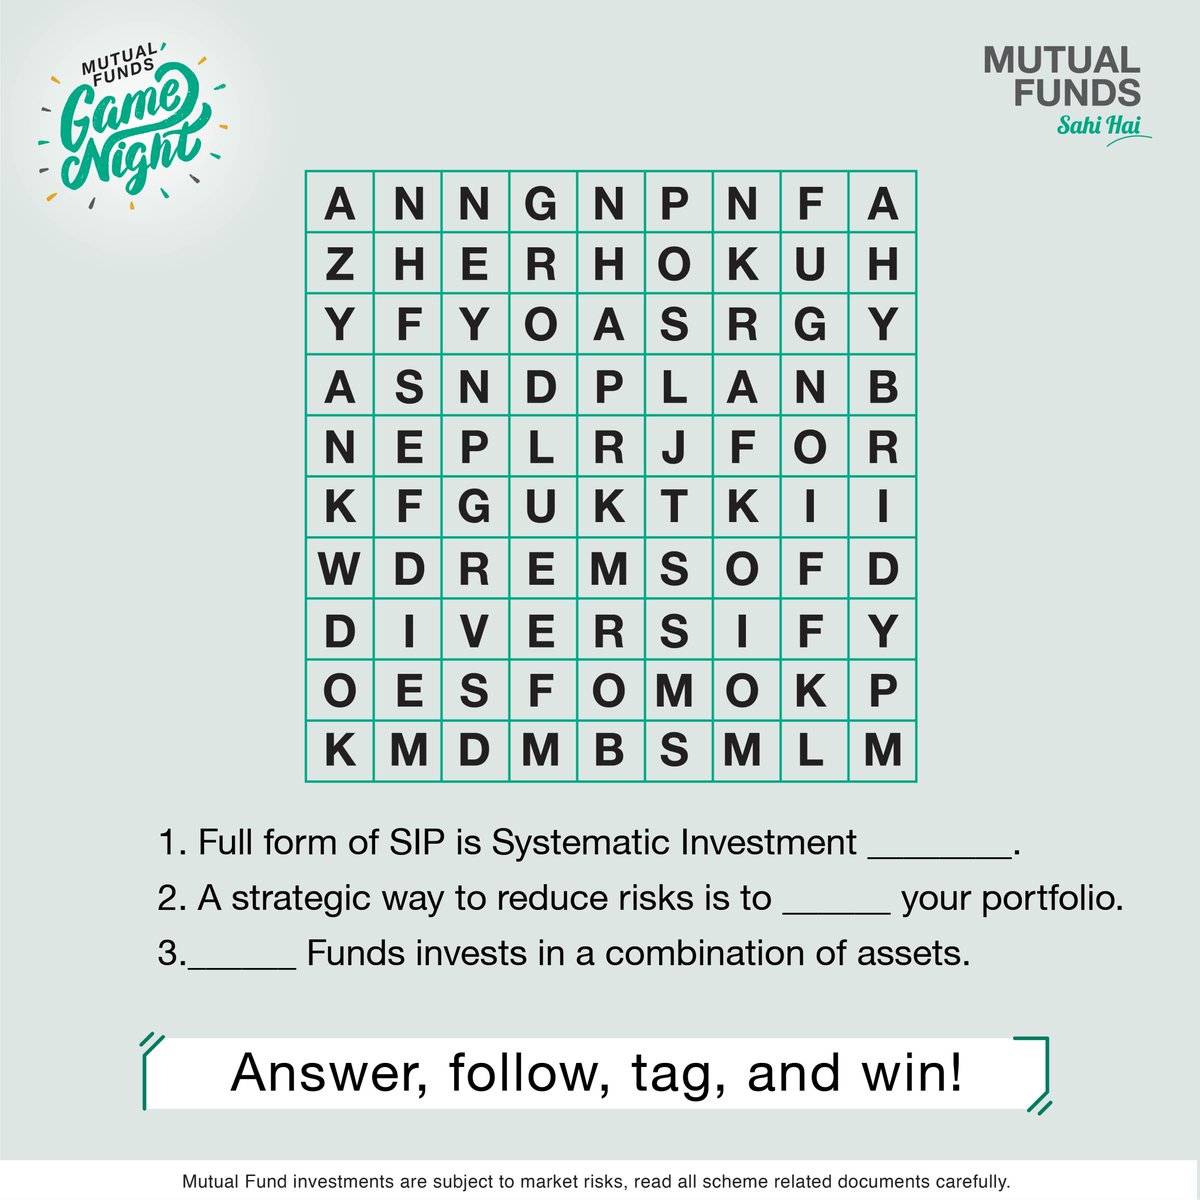 If you can find all the three words, you can stand a chance to win a voucher! To know more: mutualfundssahihai.com T&C Apply: bit.ly/3IkheUh #MutualFundsSahiHai #MutualFundsGameNight